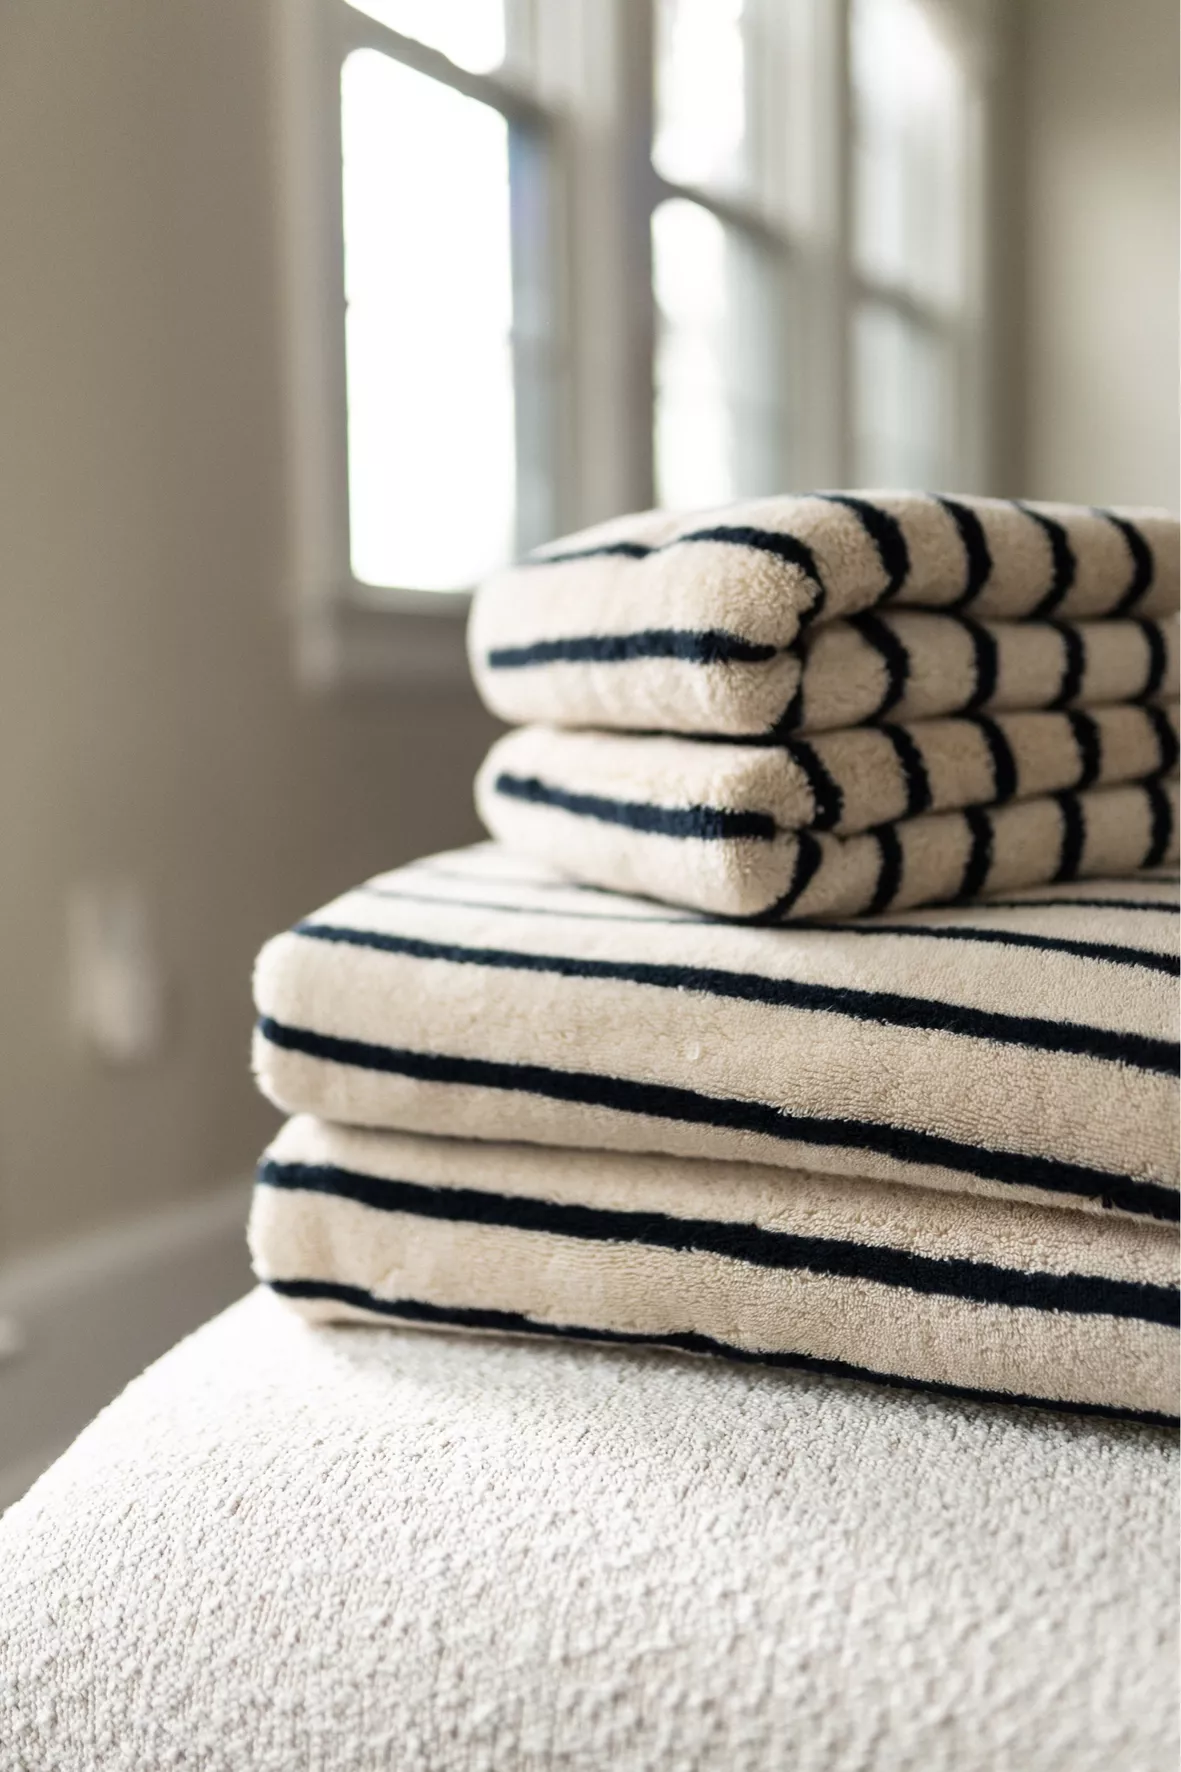 Classic Bath Towels in Vanilla by Brooklinen - Holiday Gift Ideas